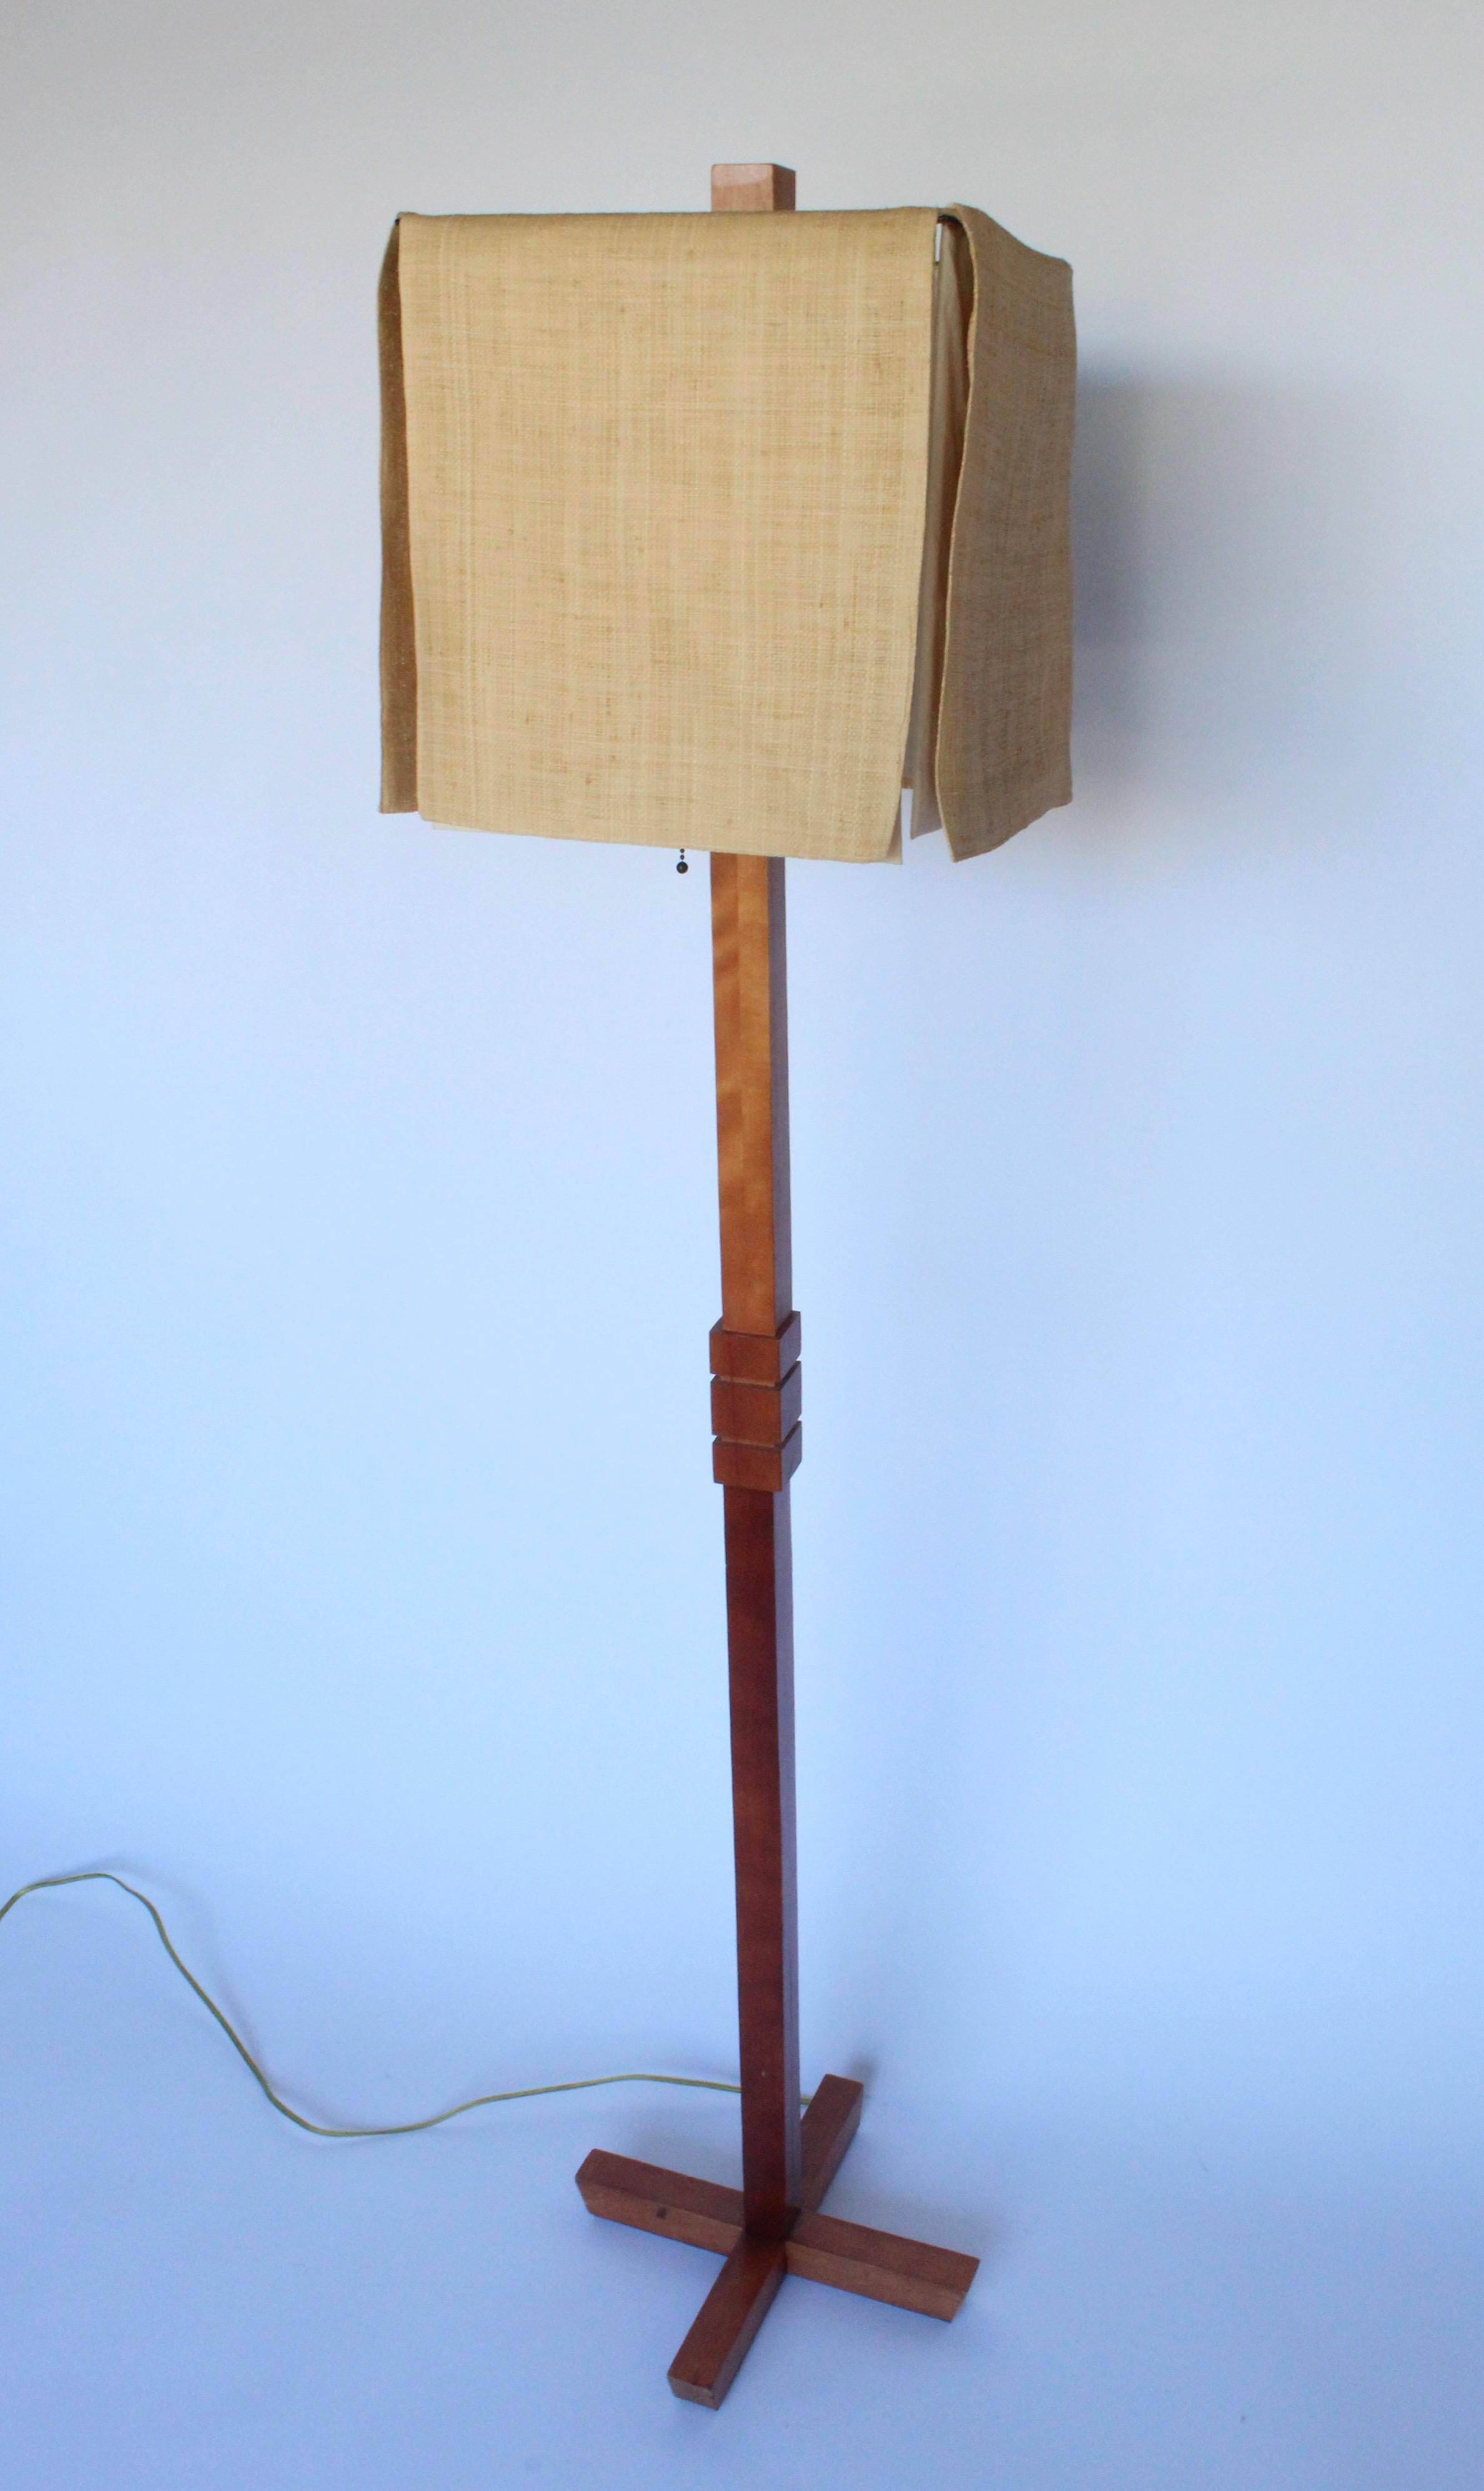 Unusual Arts & Crafts style wood floor lamp with a unique organic lamp shade. This lamp is reminiscent and in the style of Frank Lloyd Wright. Lamp would look great with any style of Decor including Mission, Mid-Century Modern, Art Deco, organic